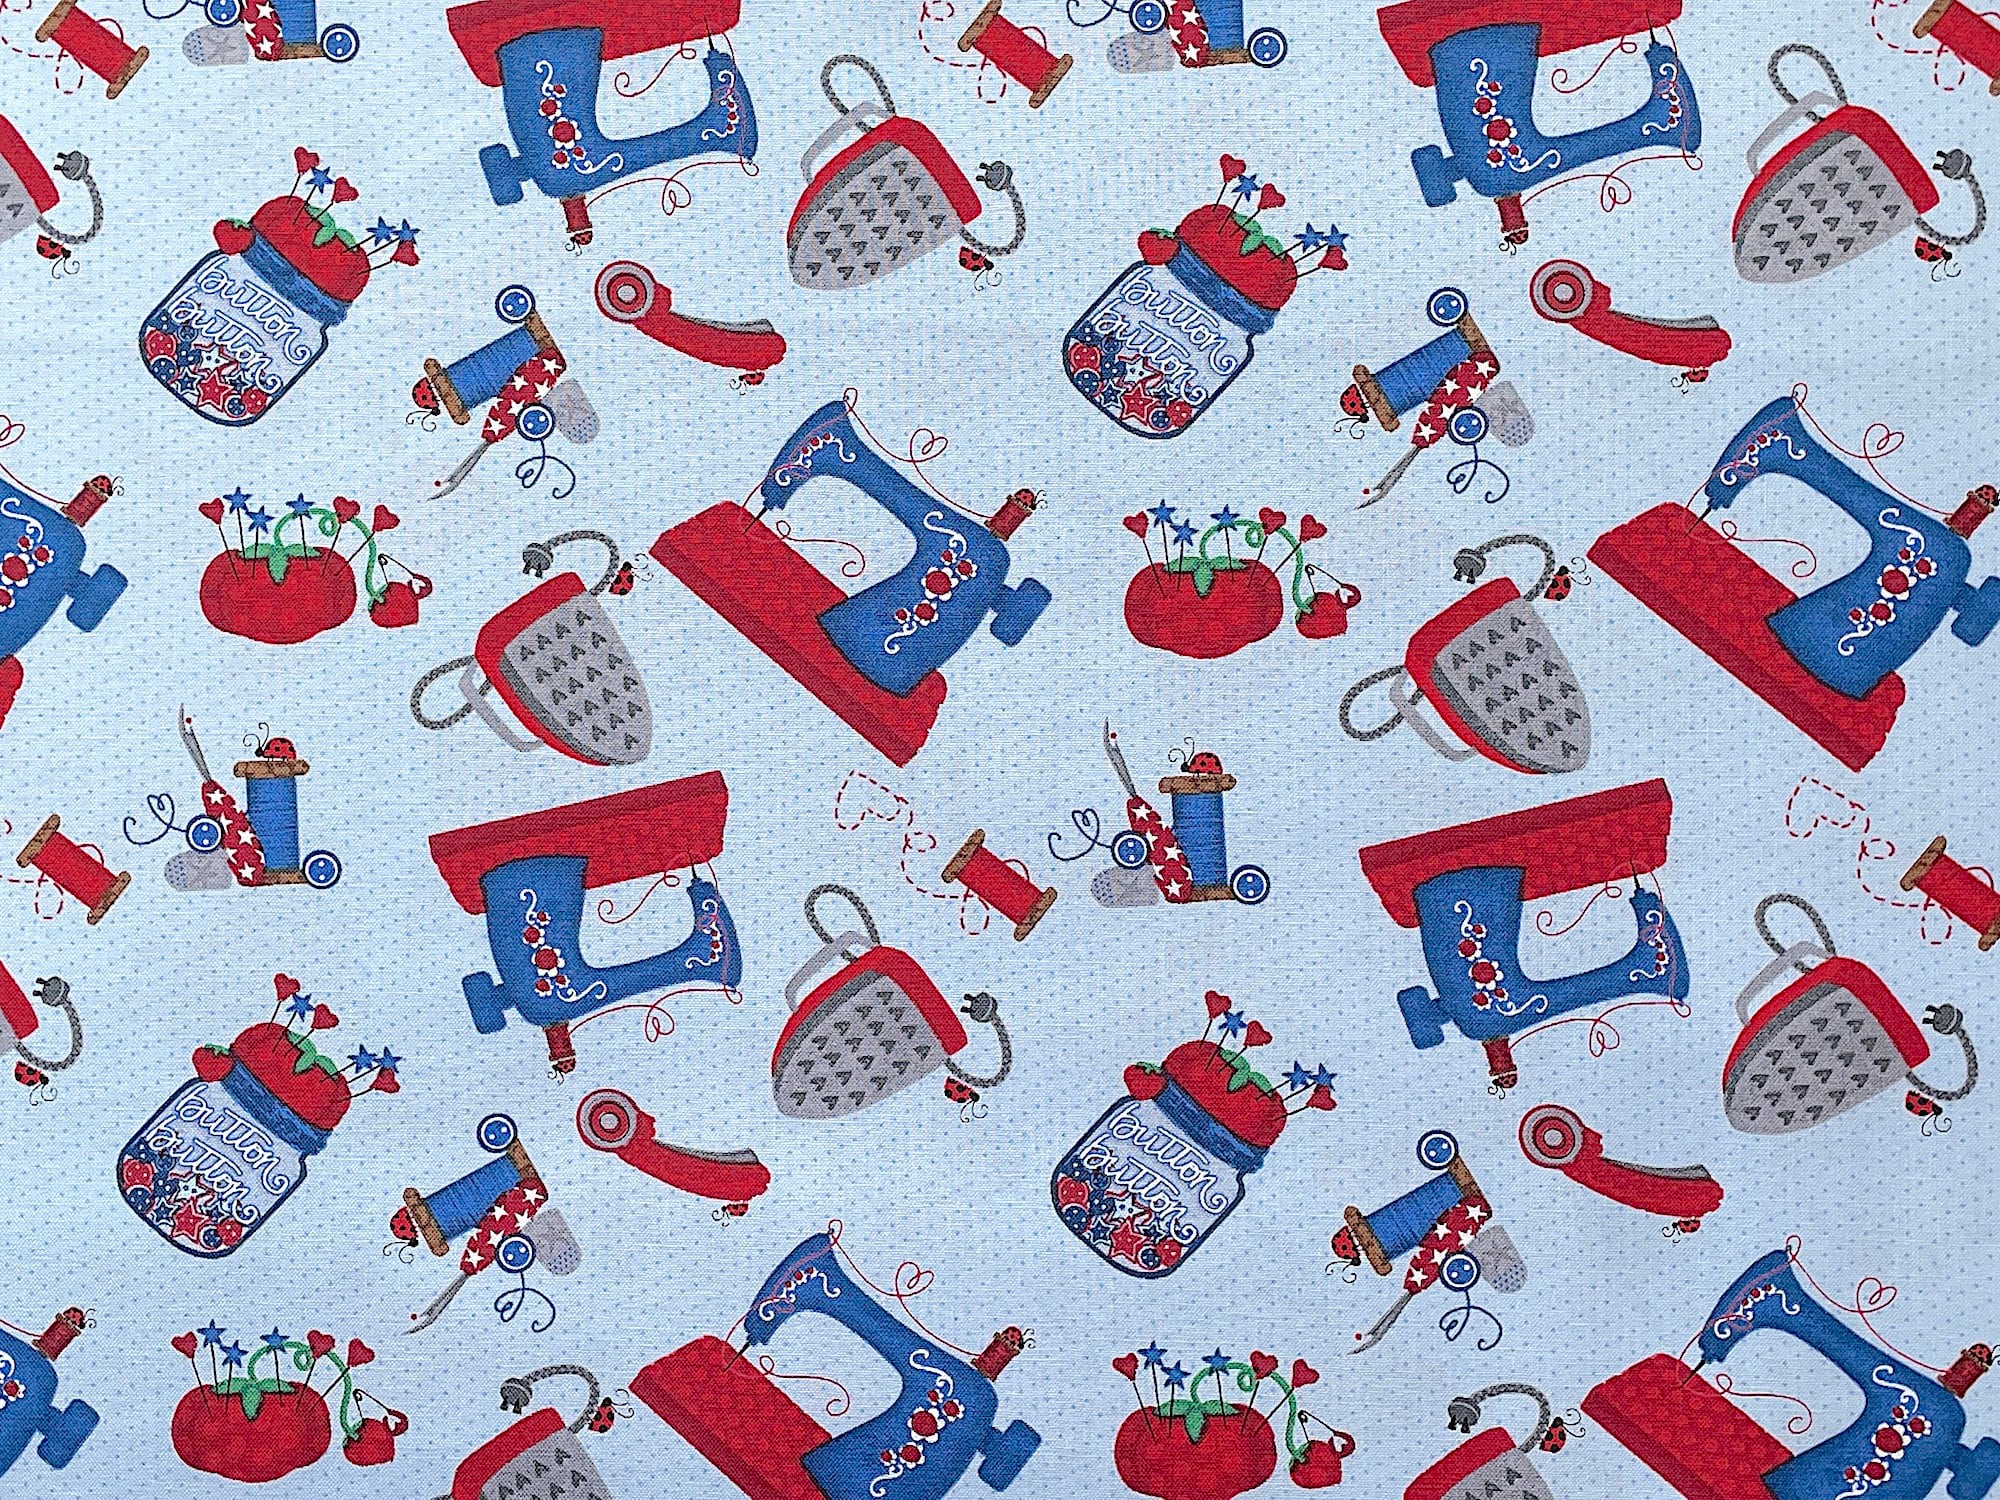 This fabric is part of the Sew Tweet Collection by Rena Askey. This blue cotton fabric is covered with sewing machines, thread and pin cushions.